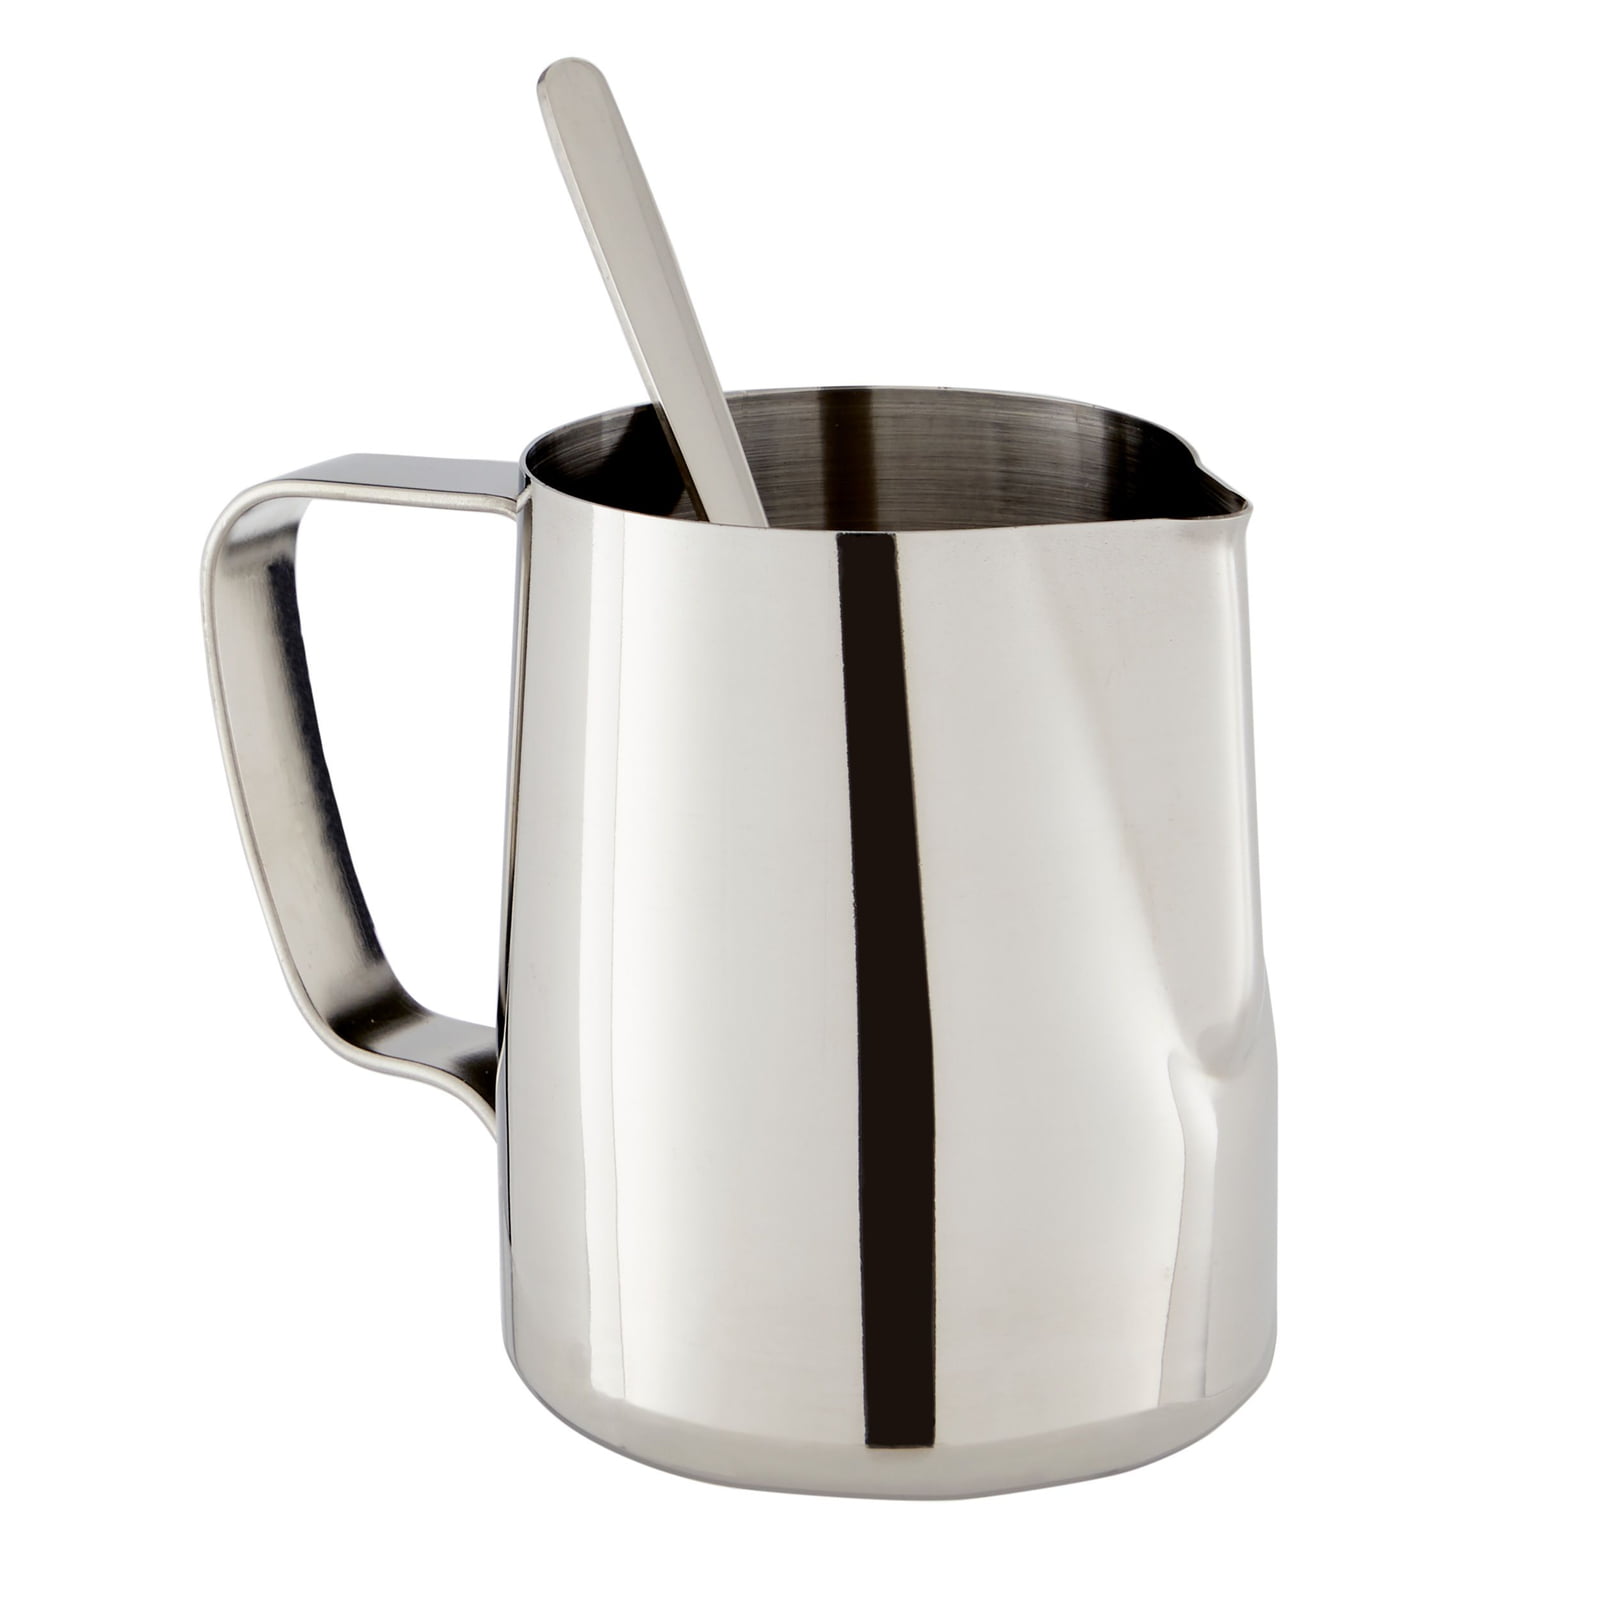 HUBERT Coffee Cream Server 1.9 L Stainless Steel Etched with Whole Milk Imprint 